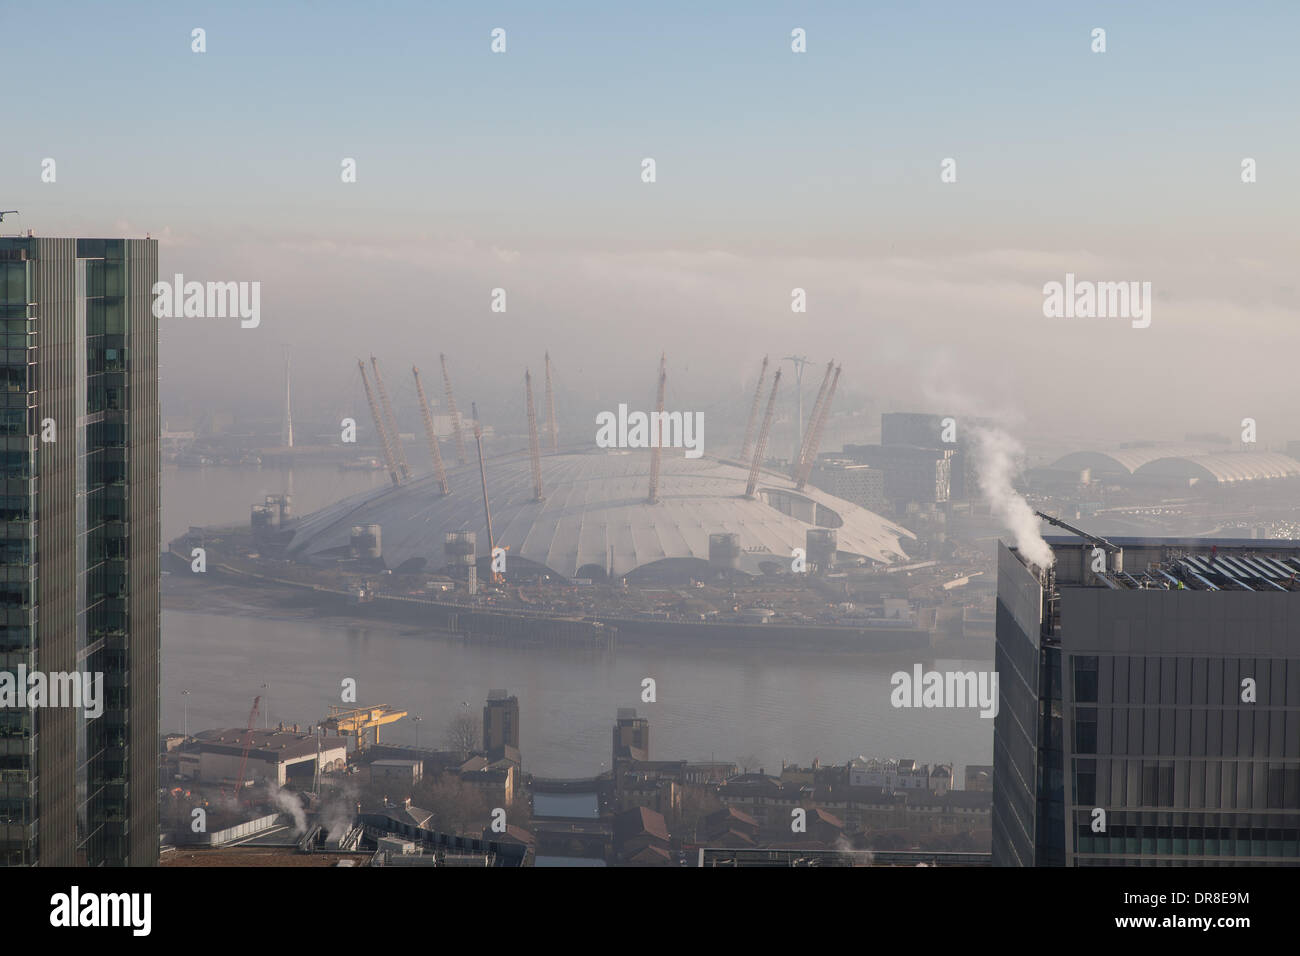 London UK, 21st Jan 2014. The early morning fog disperses revealing the O2 Arena on the Greenwich Peninsula. Dense fog to the east is still visible. This was shot from 1 Canada Square in Canary Wharf. © Steve Bright/Alamy Live News Credit:  Steve Bright/Alamy Live News Stock Photo